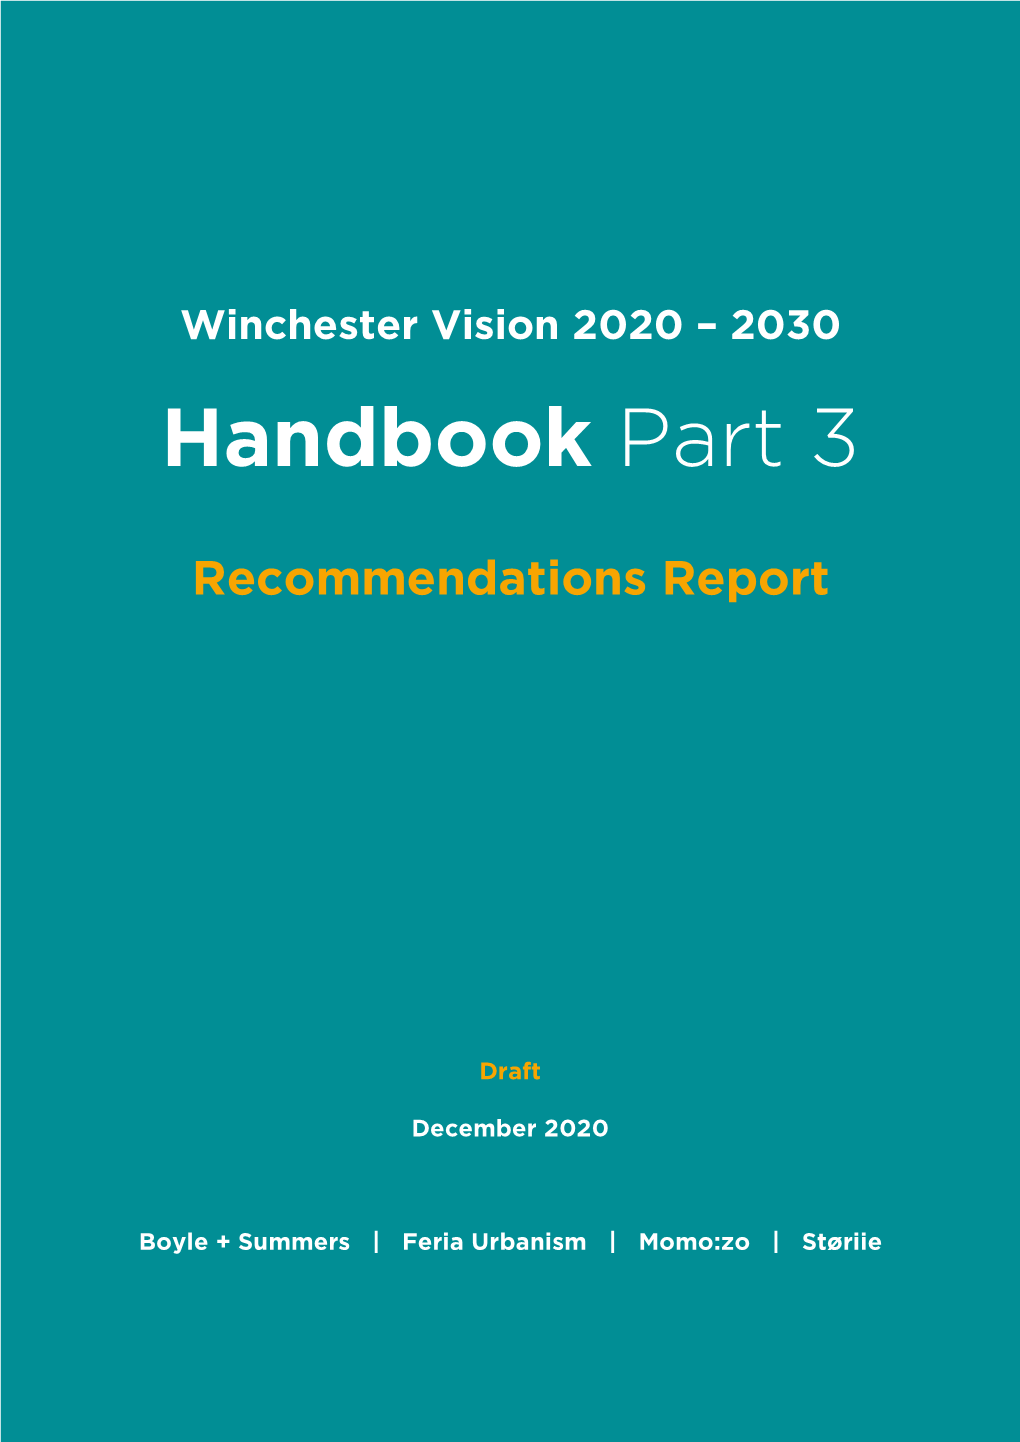 Download Winchester Vision 2030 – Part 3